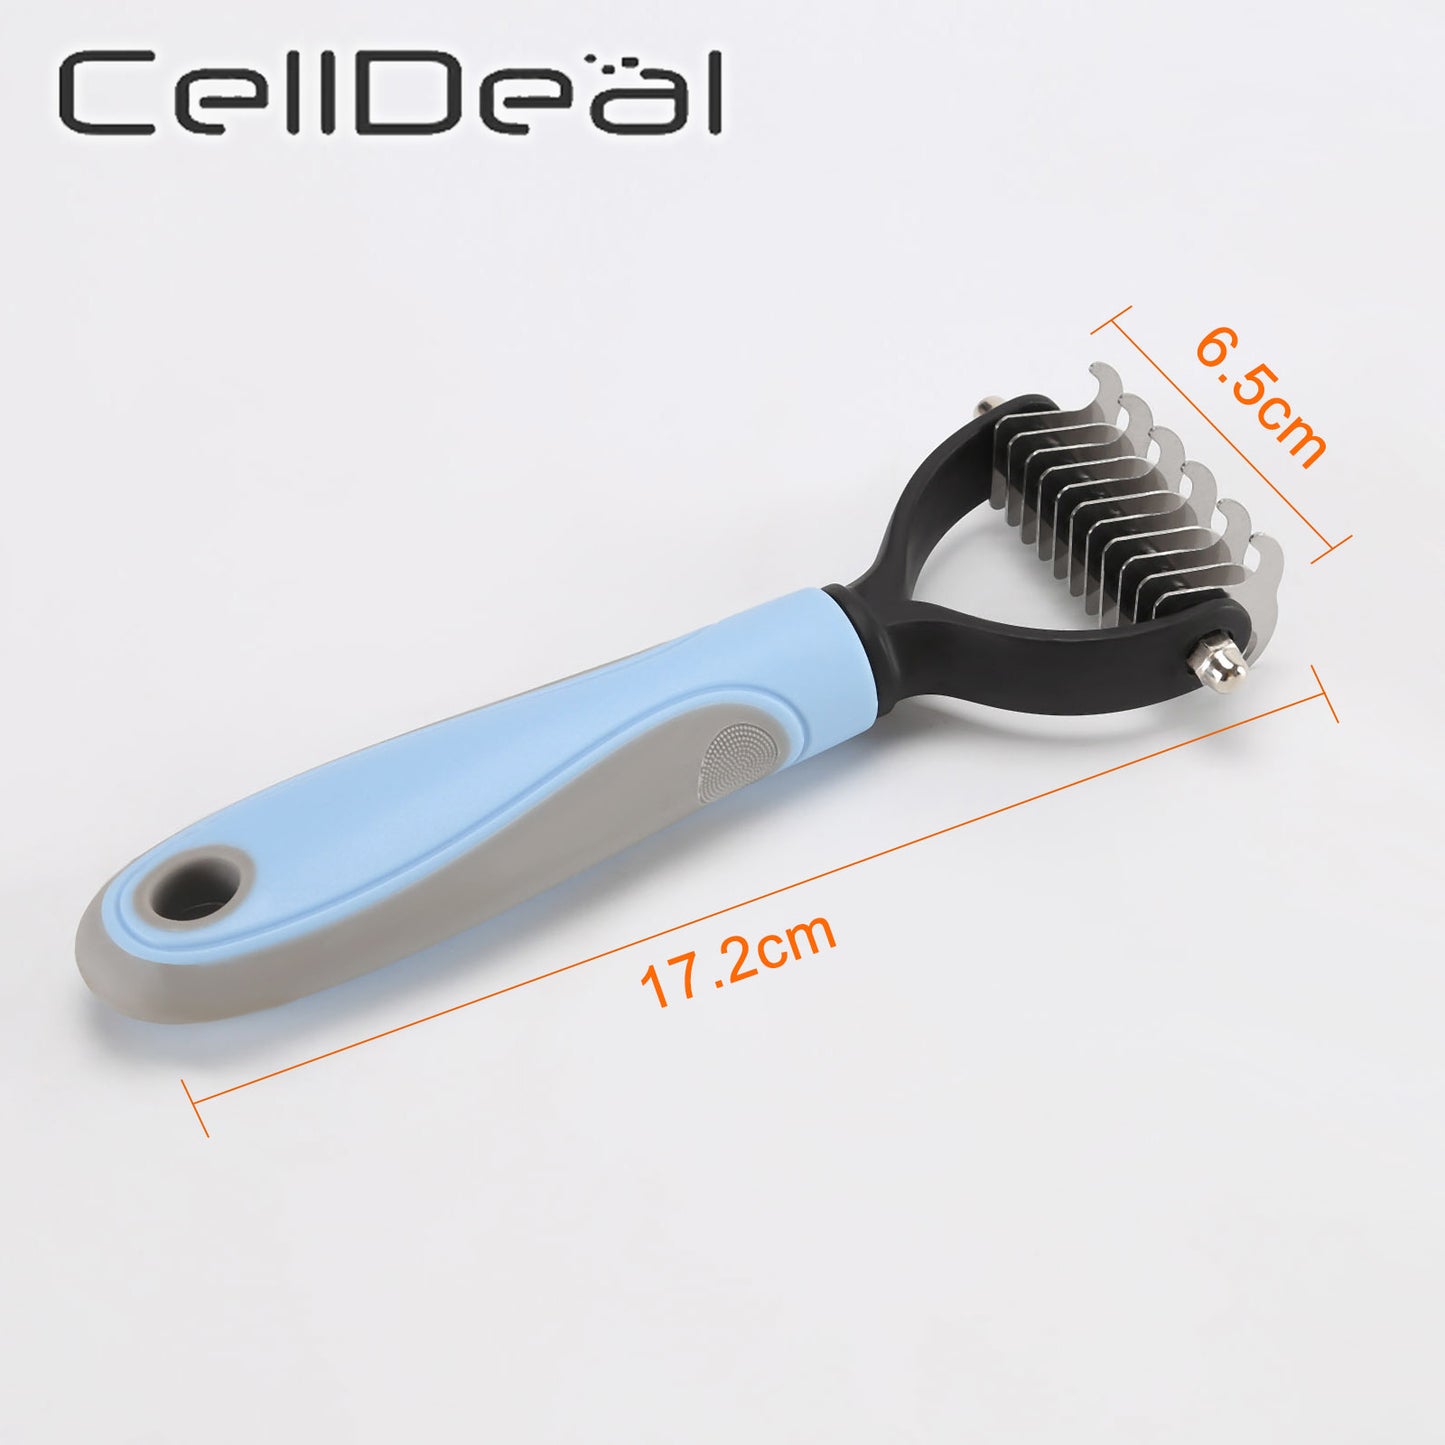 Pets Trimming Grooming Tool